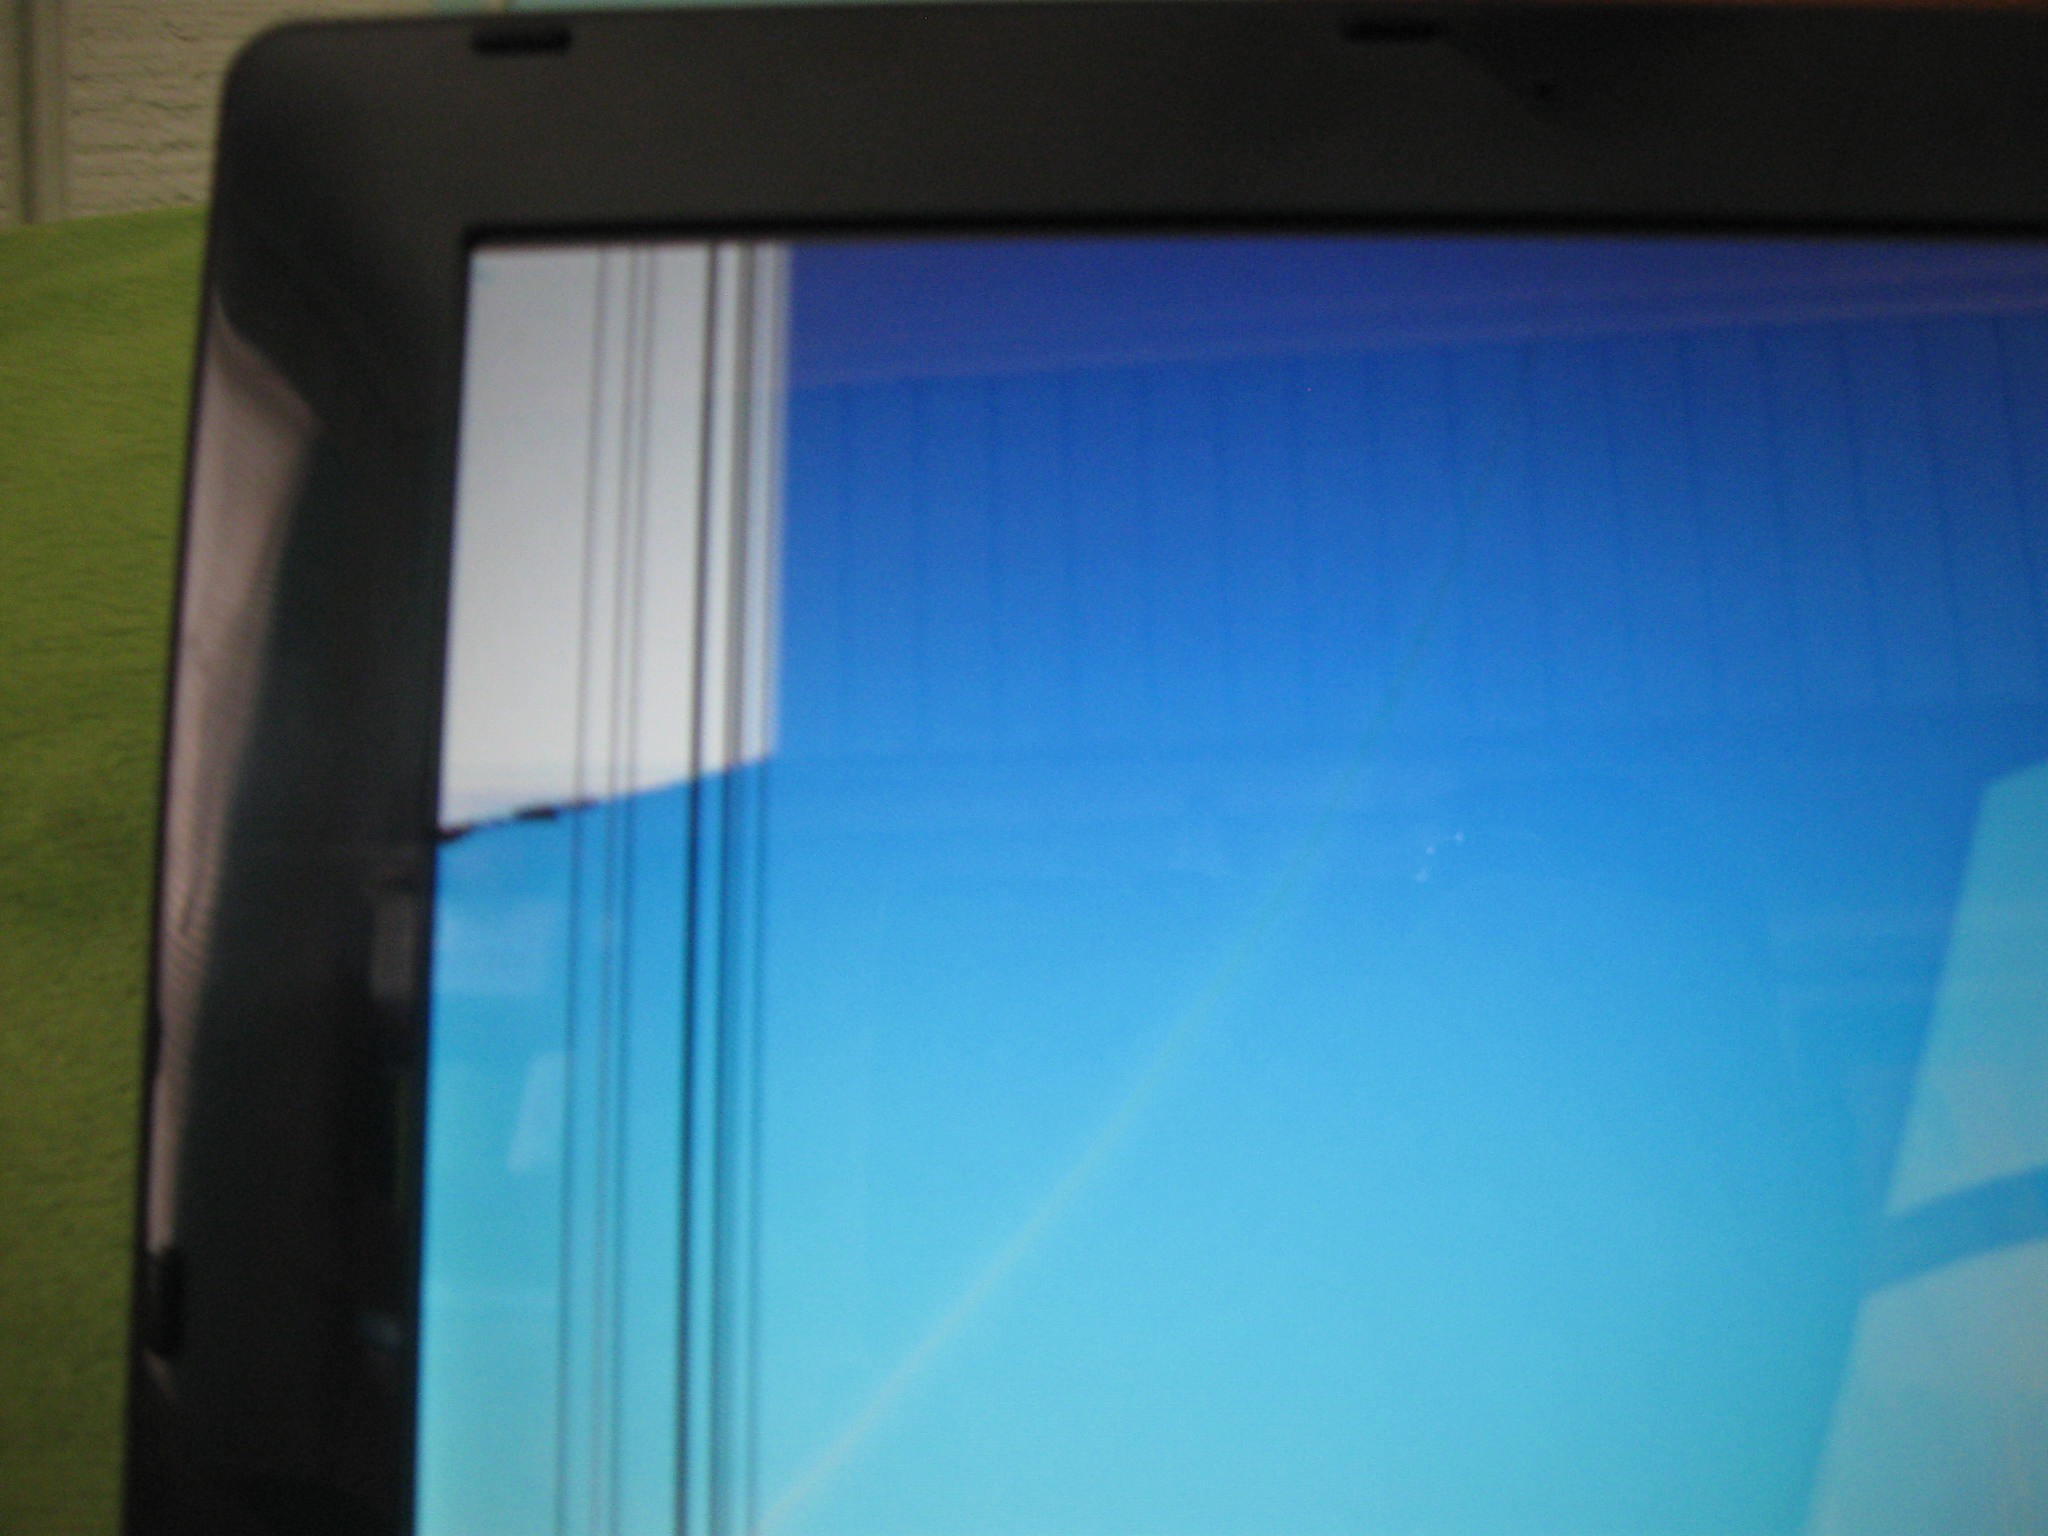 The cracked screen of a Netbook Acer